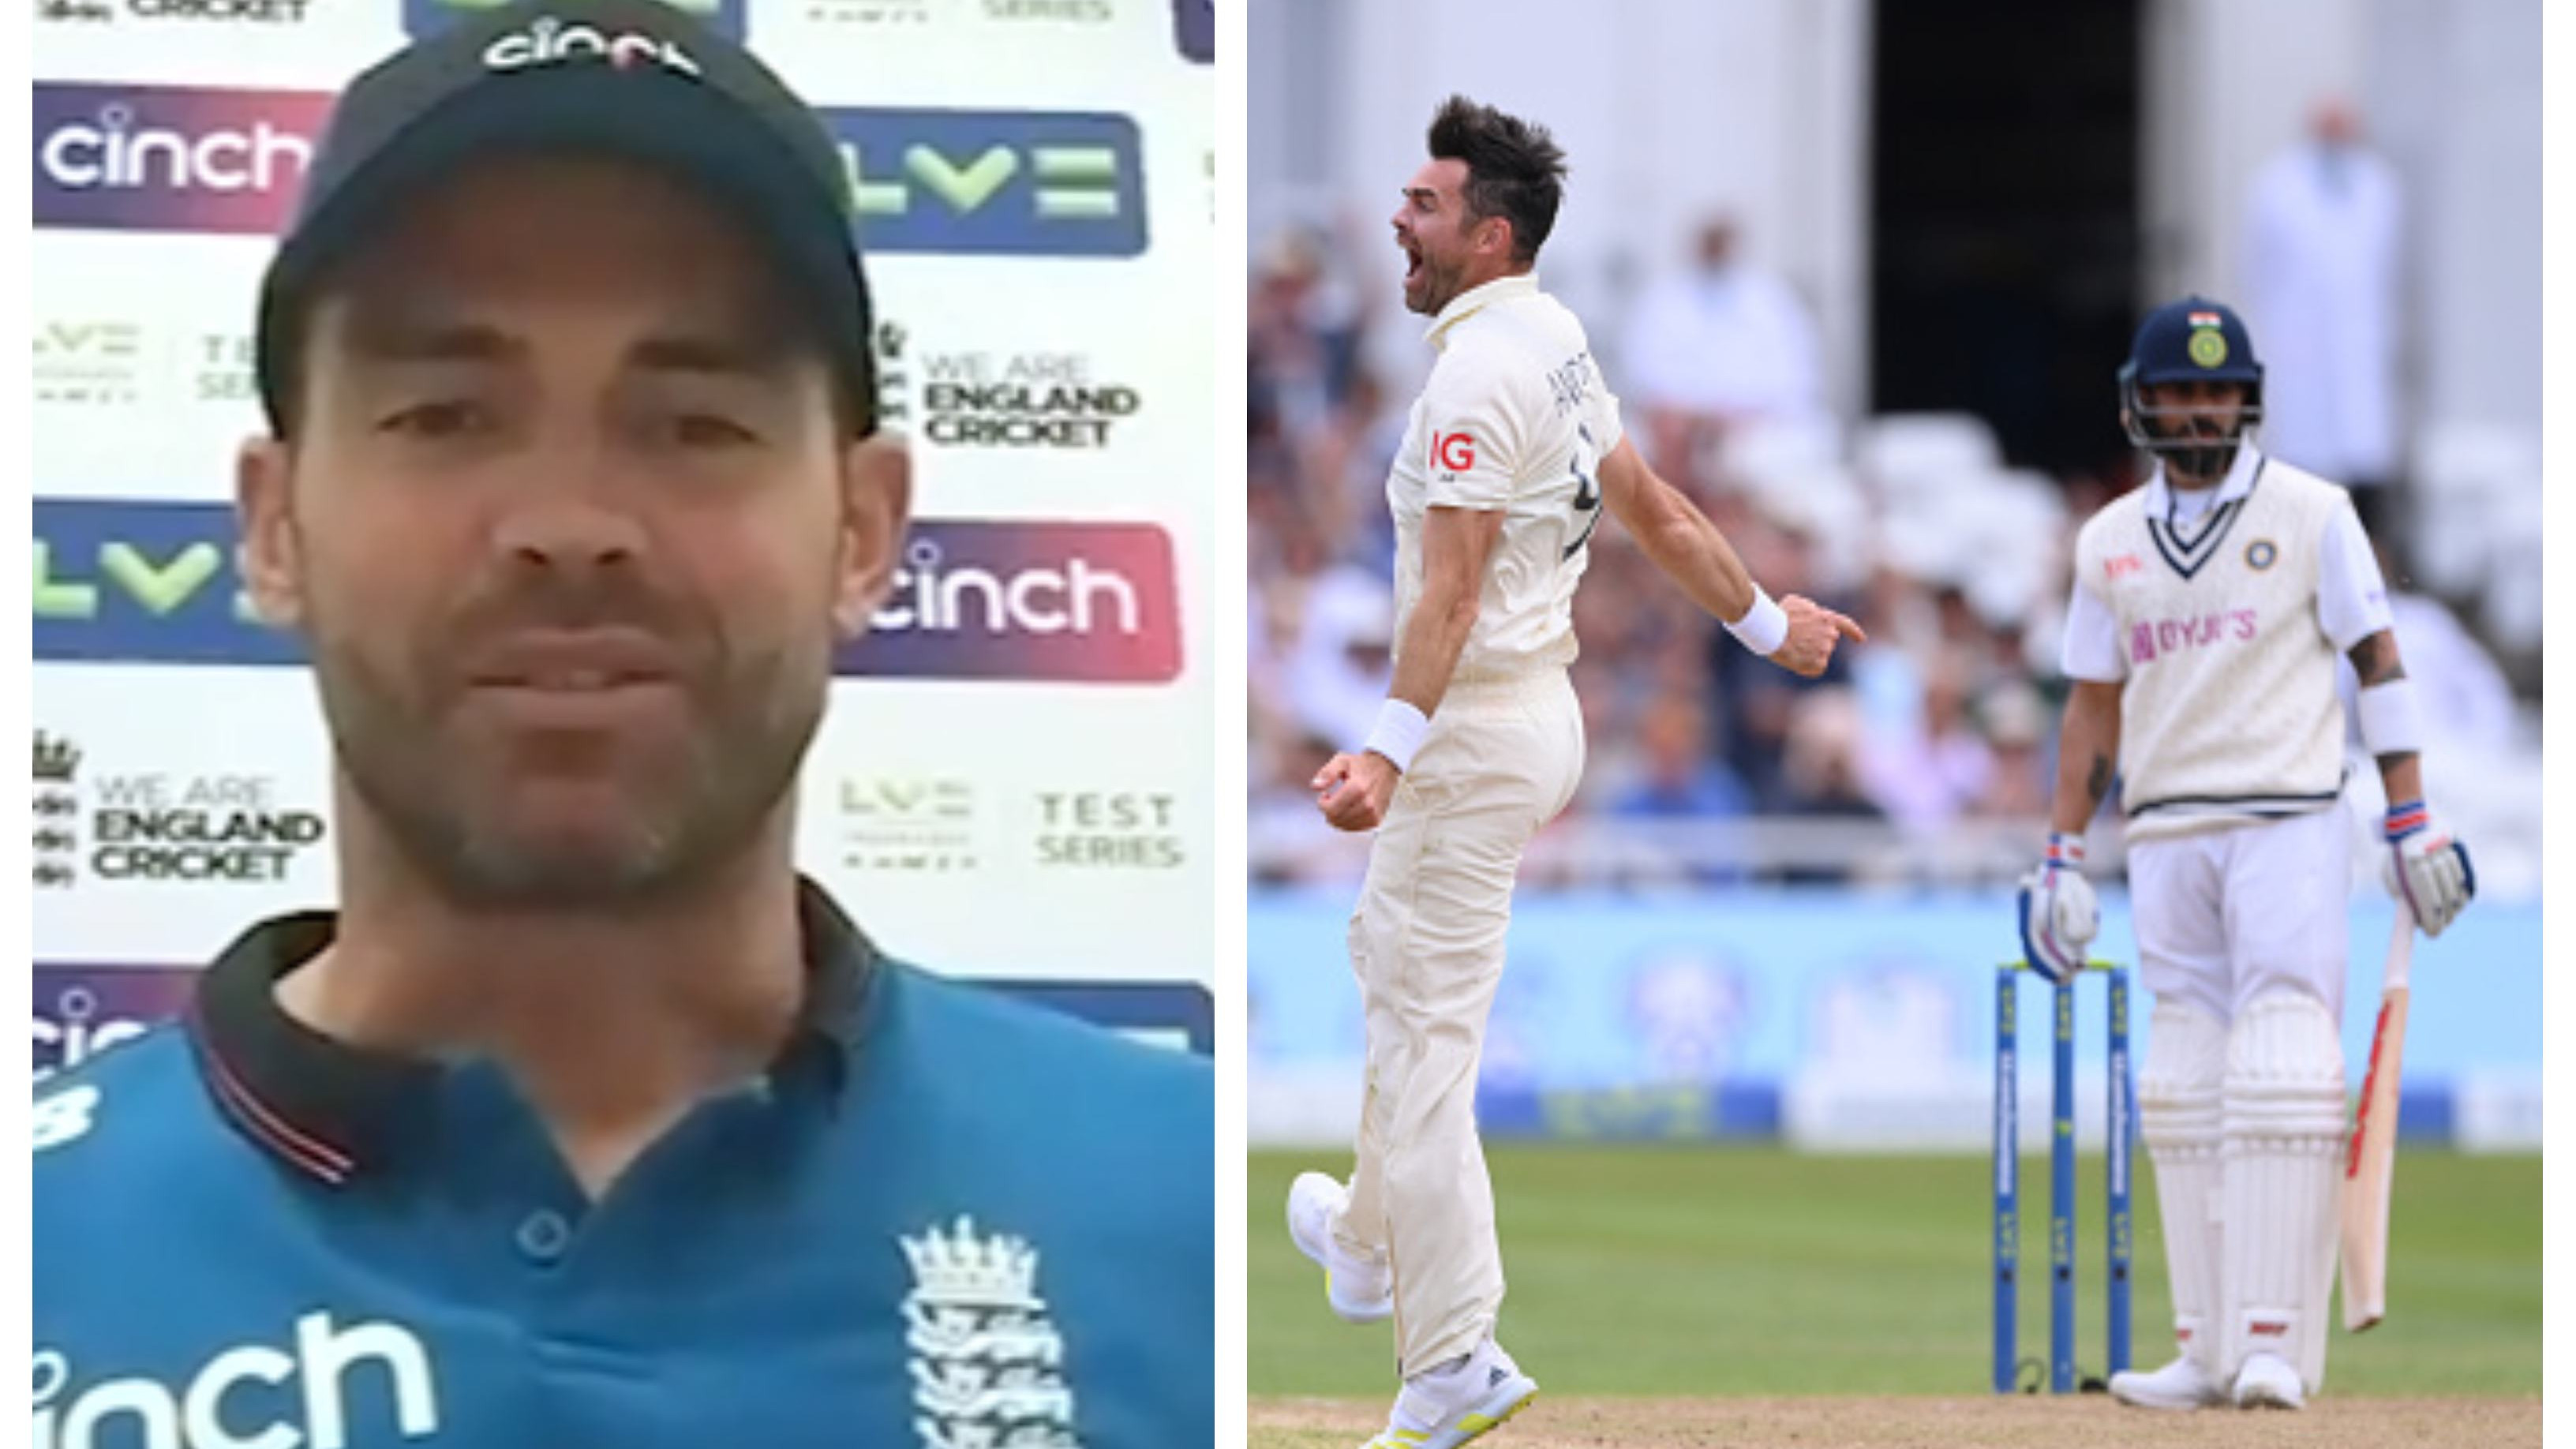 ENG v IND 2021: ‘Getting Kohli out that early was quite unusual’, says James Anderson